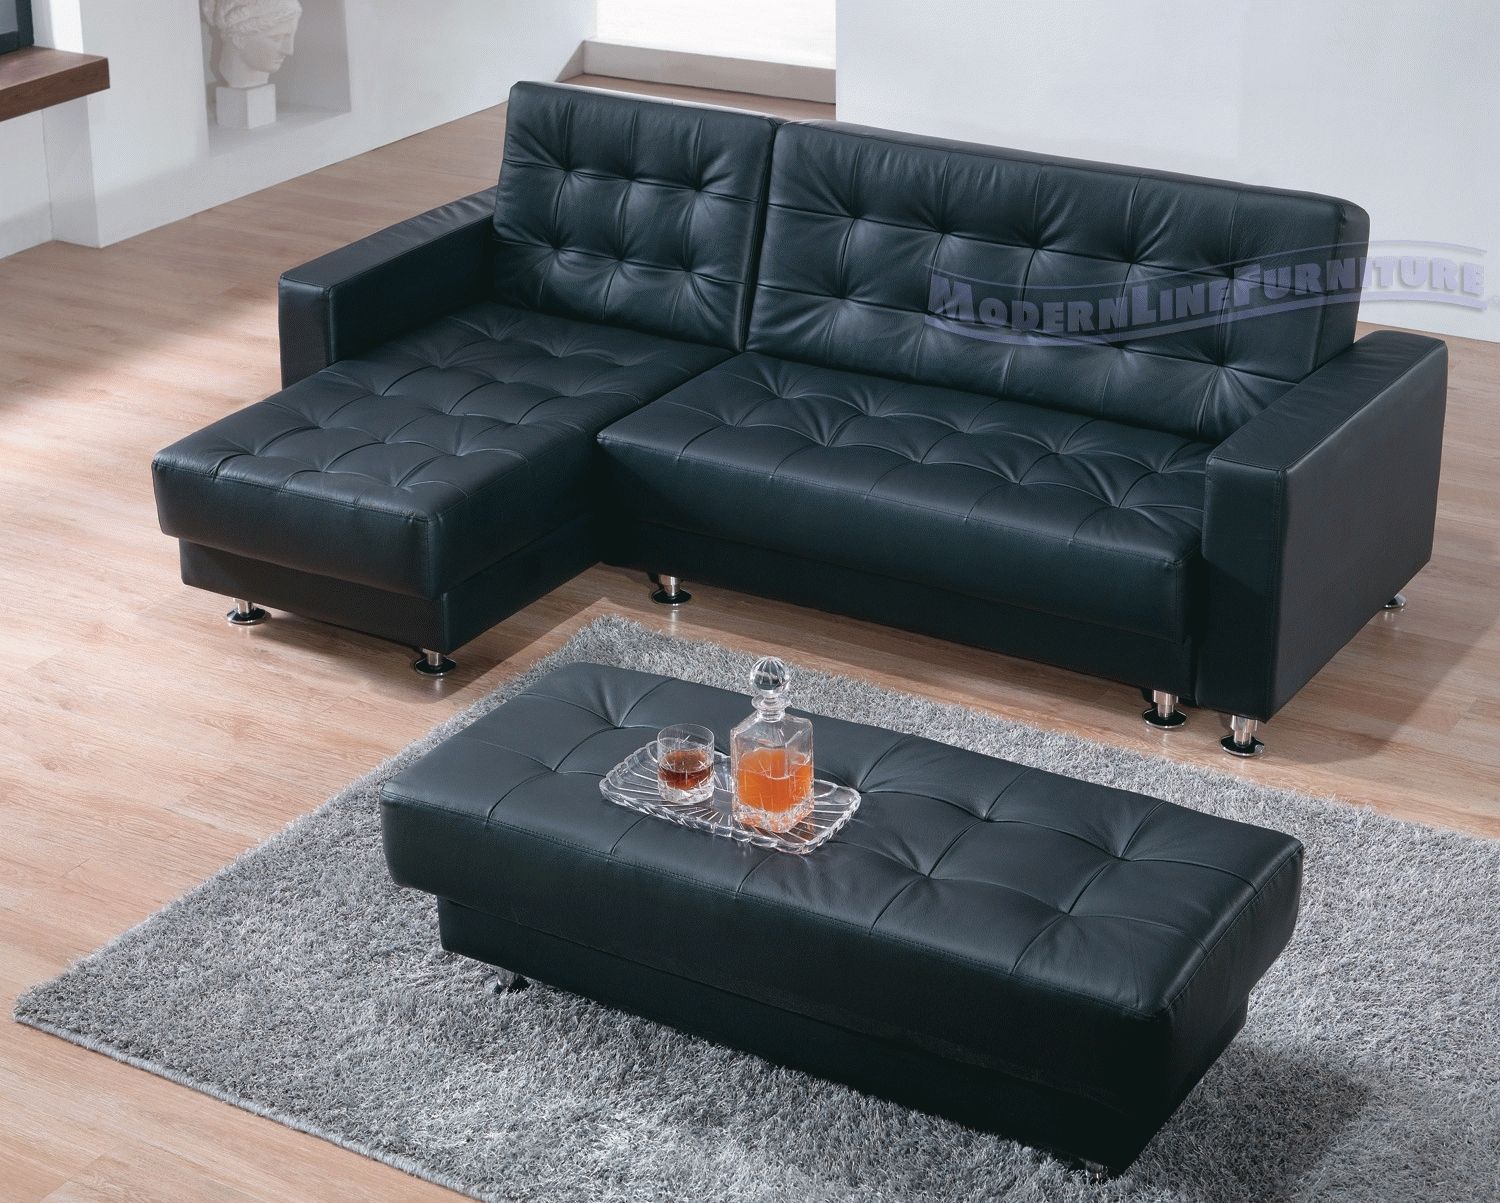 Furniture: Inspiring Sectional Sleeper For Your Interiors With Regard To Black Leather Sectional Sleeper Sofas (View 24 of 30)